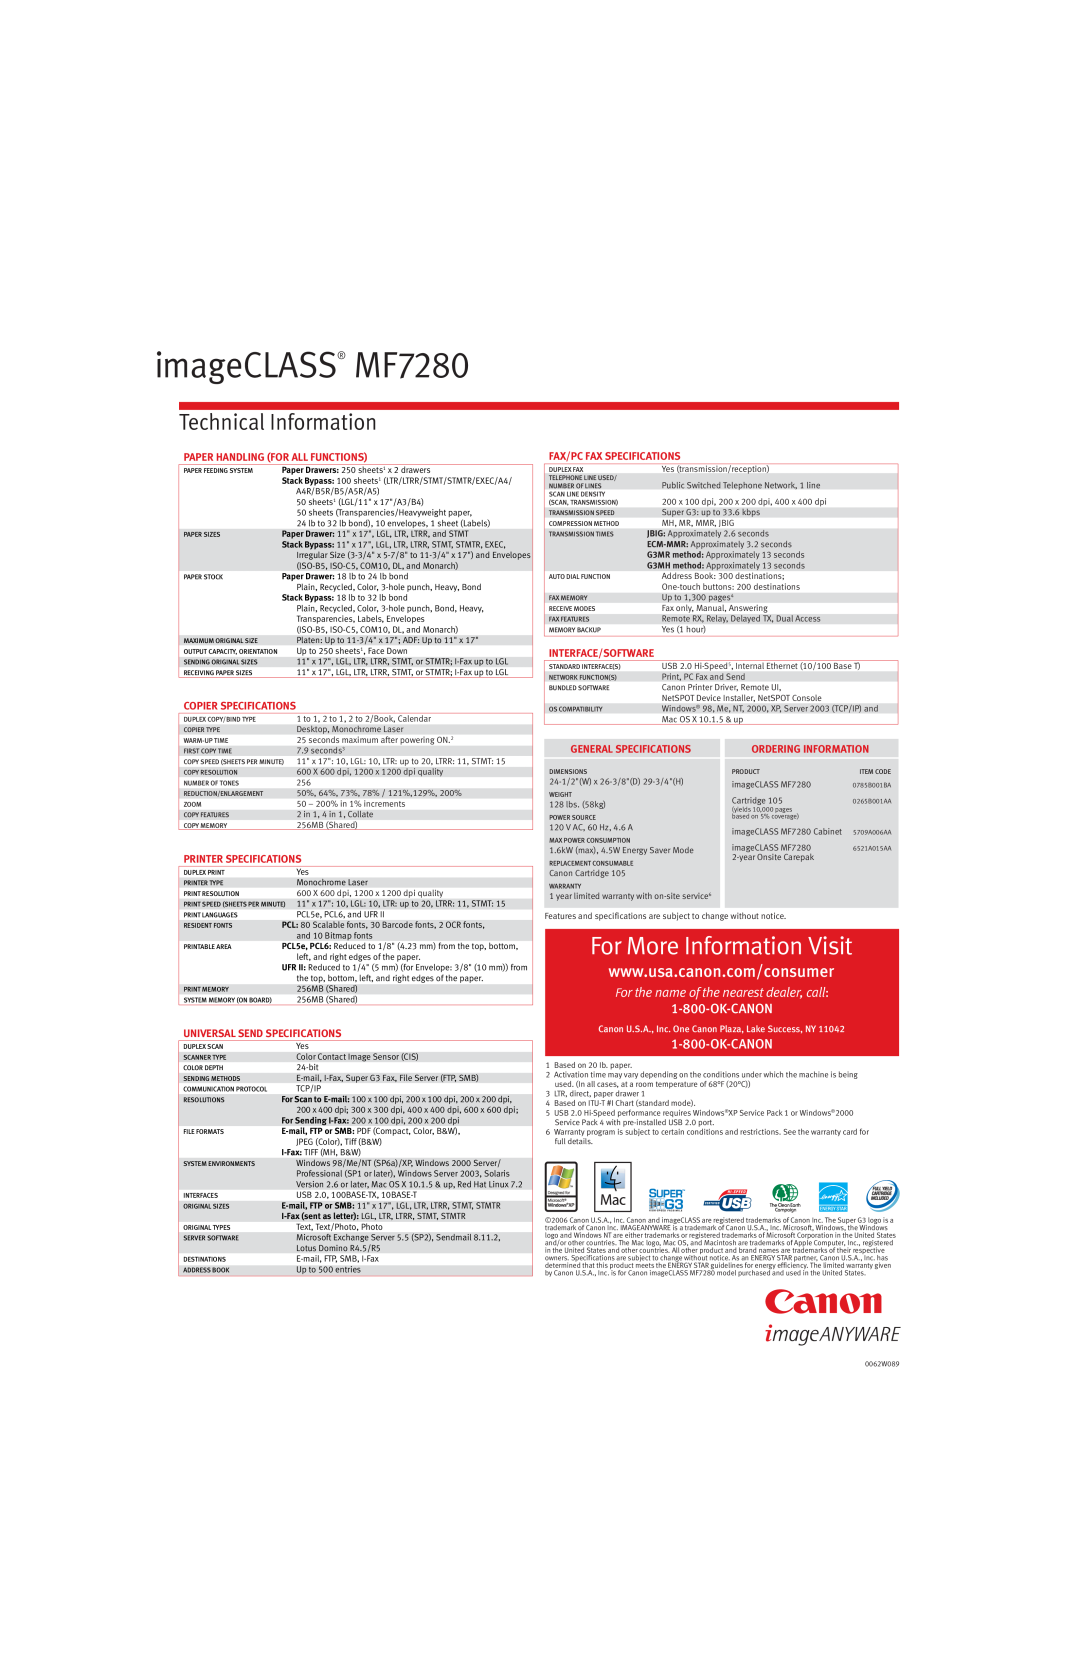 Canon imageCLASS MF7280, For More Information Visit, Technical Information, For the name of the nearest dealer, call 